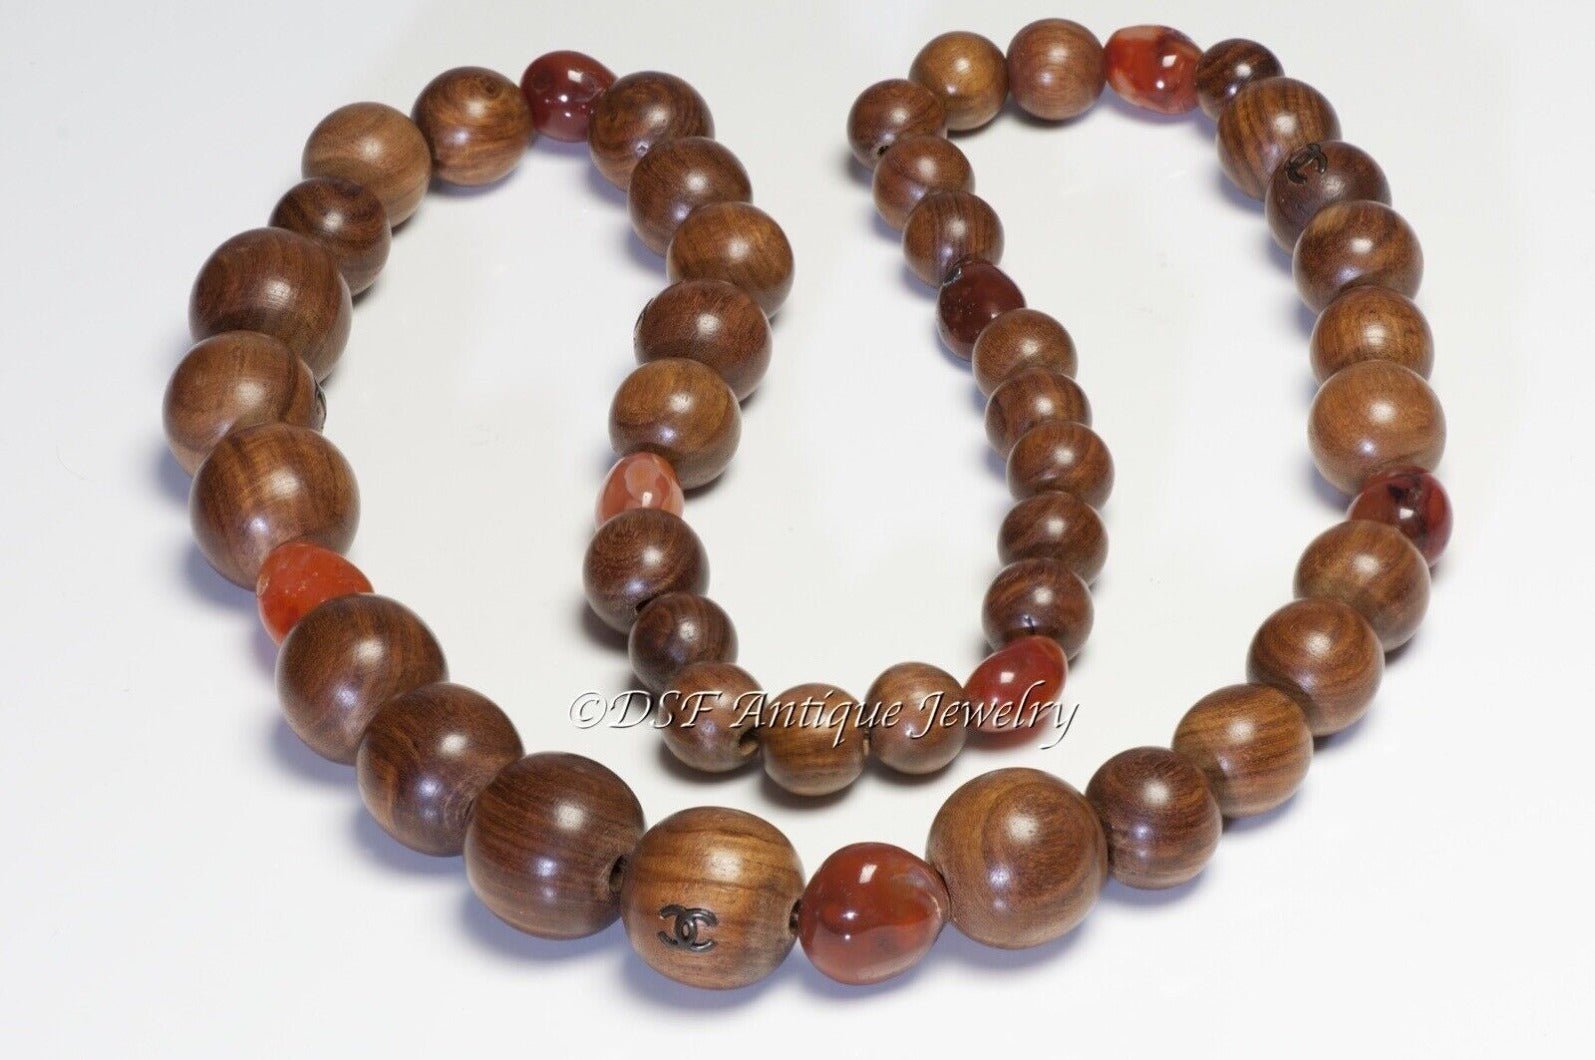 CHANEL Paris Fall 1998 Brown Wood Agate CC Beads Necklace - DSF Antique Jewelry